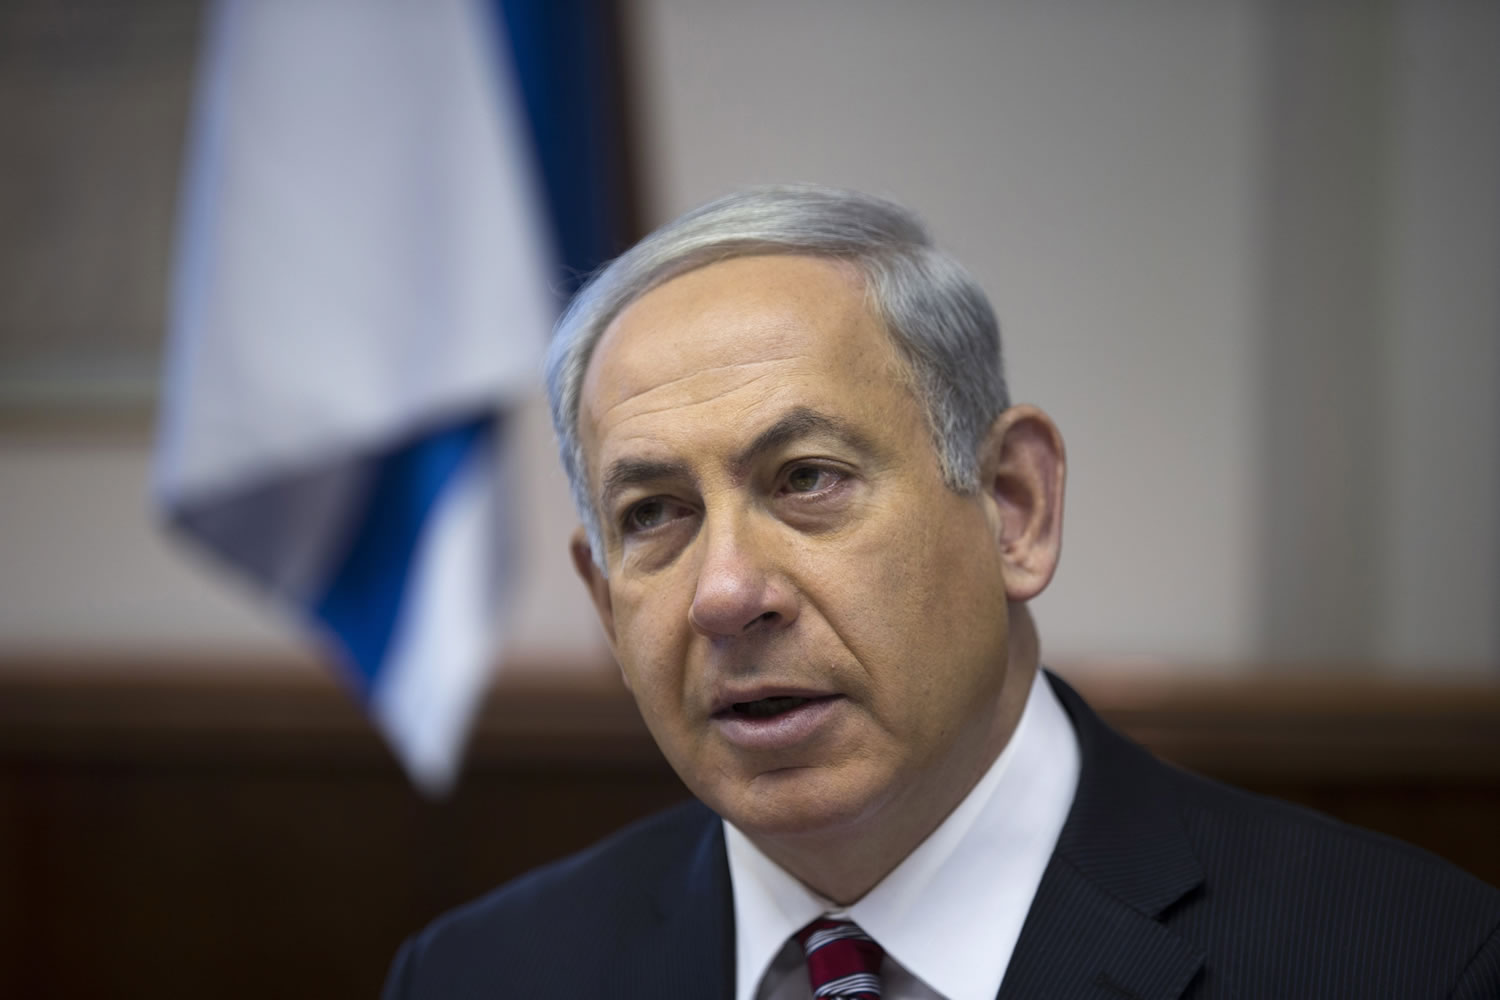 Benjamin Netanyahu, Israel's prime minister, offered a unique solution to unrest that was immediately rejected by Palestinians and Jewish settlers he thinks should be allowed to remain in a future Palestine.